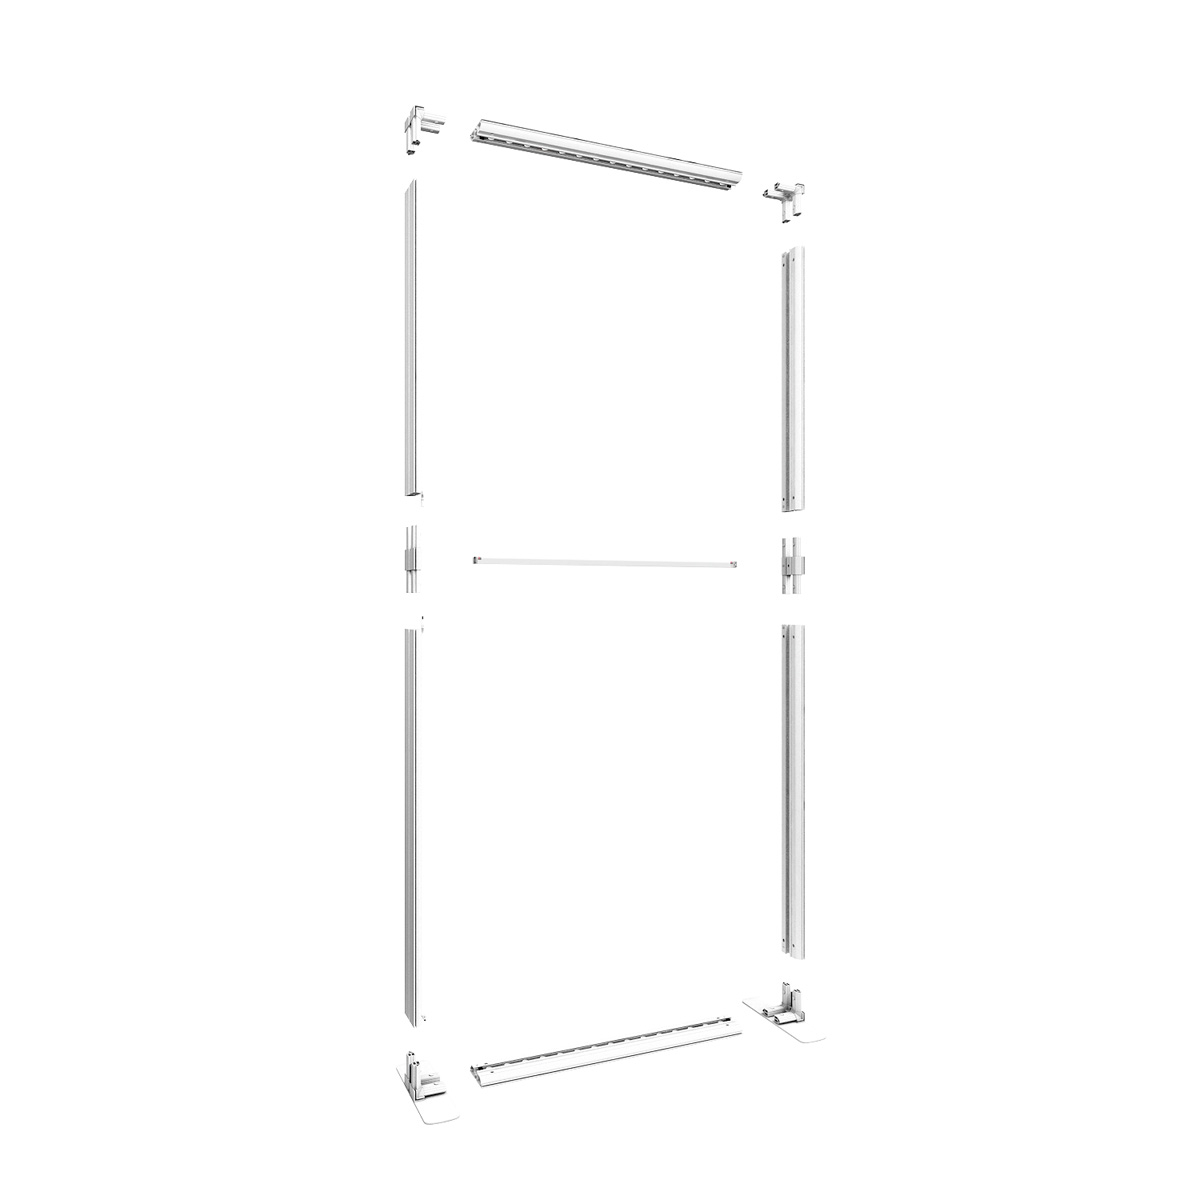 FABRILUX® LED Lightbox 1000 x 2250mm Exploded Parts Diagram